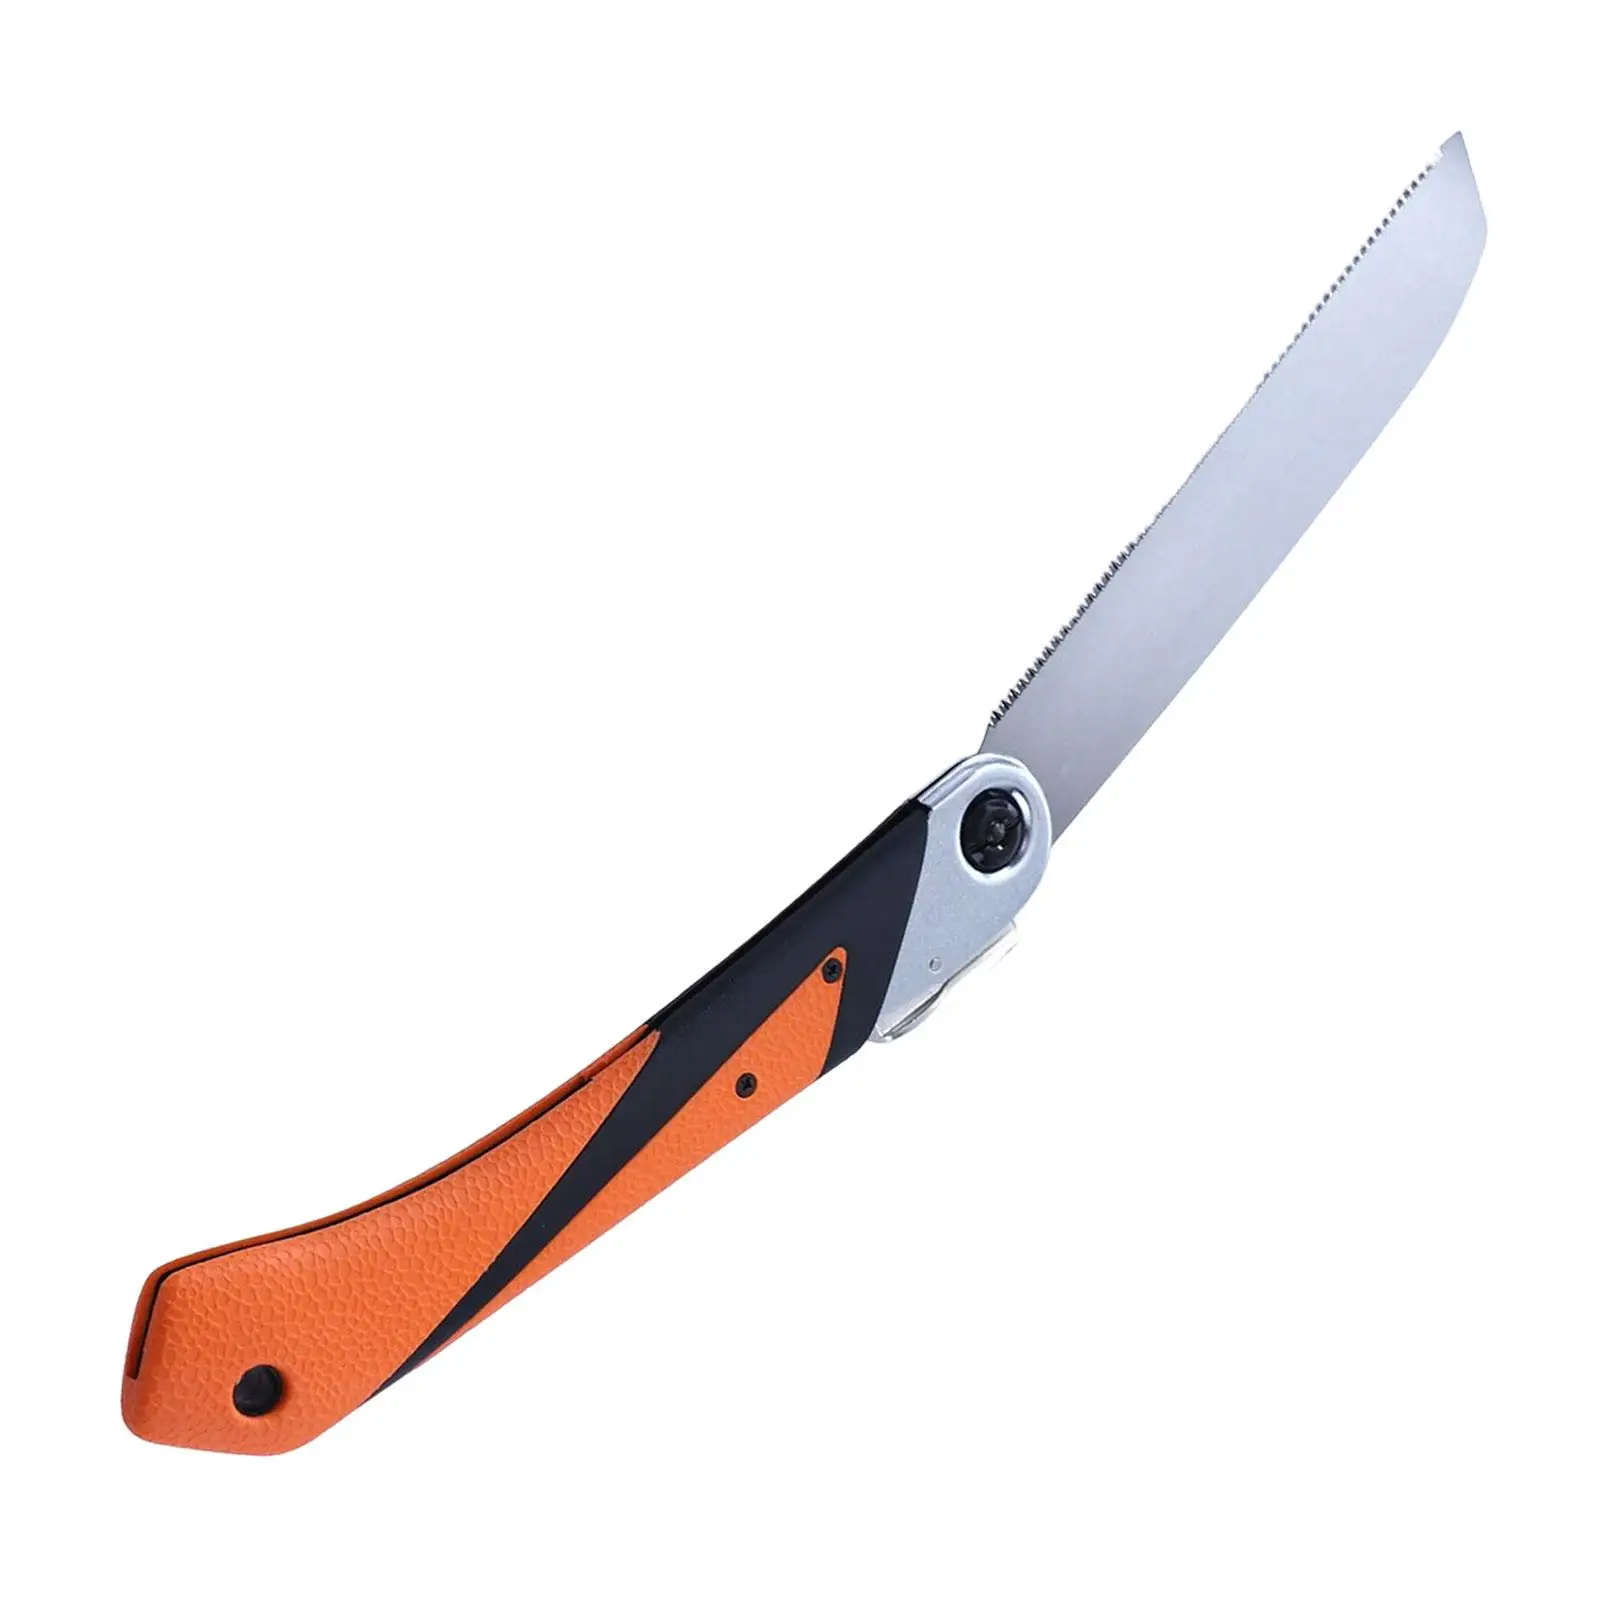 Portable Folding Saw Efficient Sawing Cutting Woodworking Tool Sturdy Trimming Hand Saw for Hunting Household Hiking